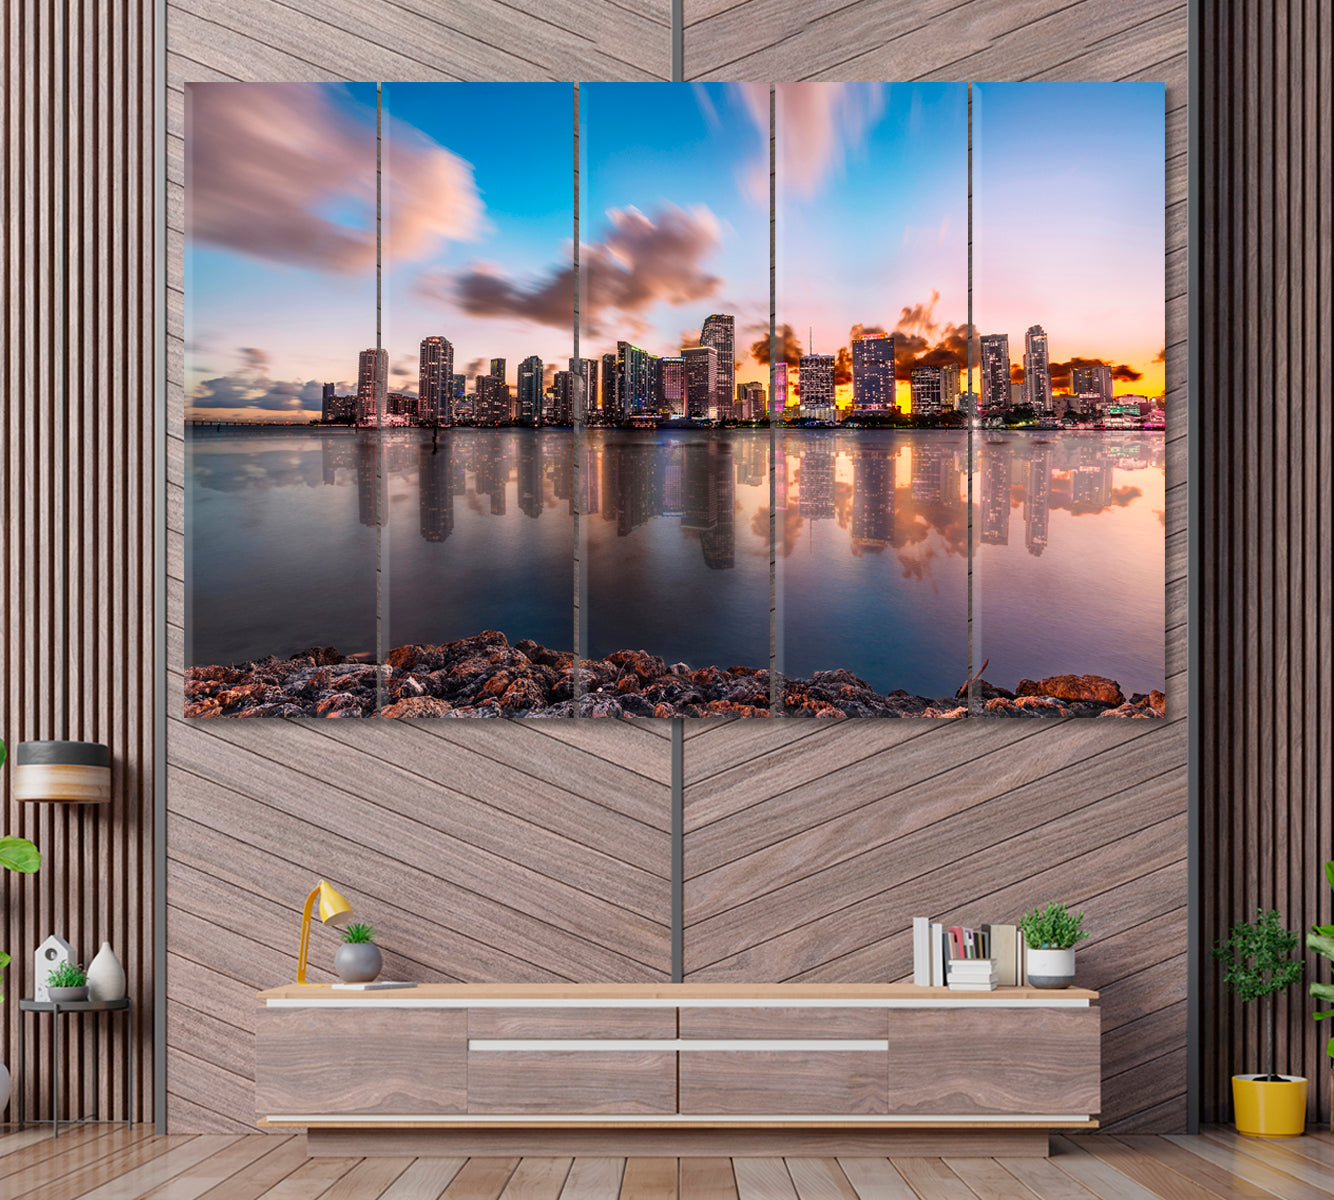 Miami at Twilight Canvas Print ArtLexy 5 Panels 36"x24" inches 